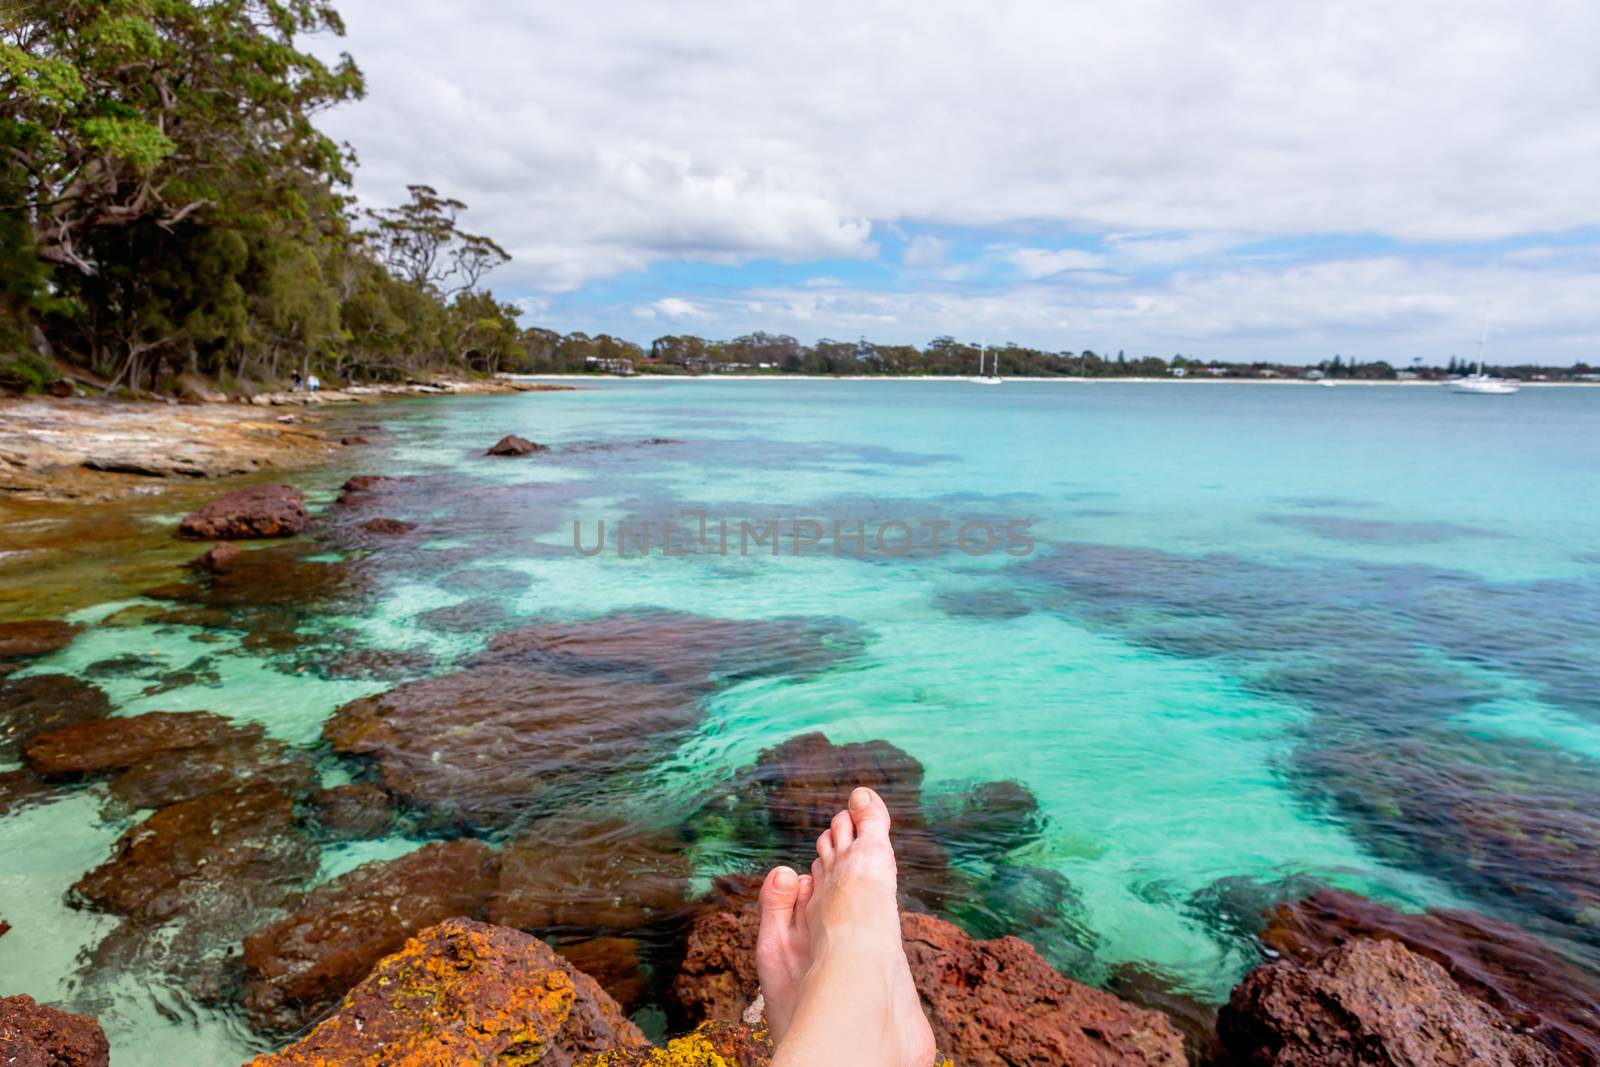 Relaxing on rocks in crystal clear waters, a beach paradise, yachts and boats moored offshore